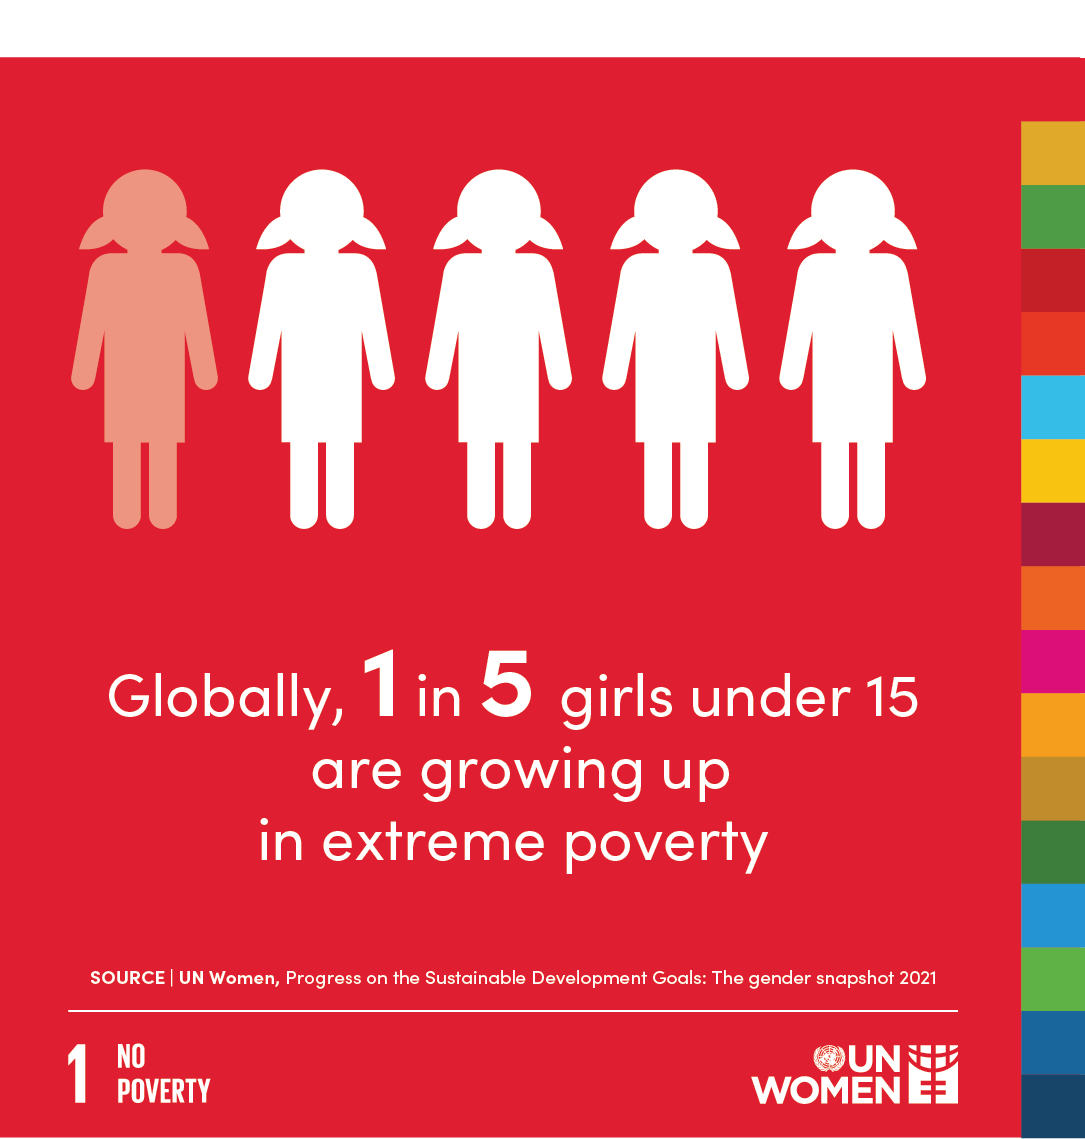 Globally, 1 in 5 girls under 15 are growing up in extreme poverty.